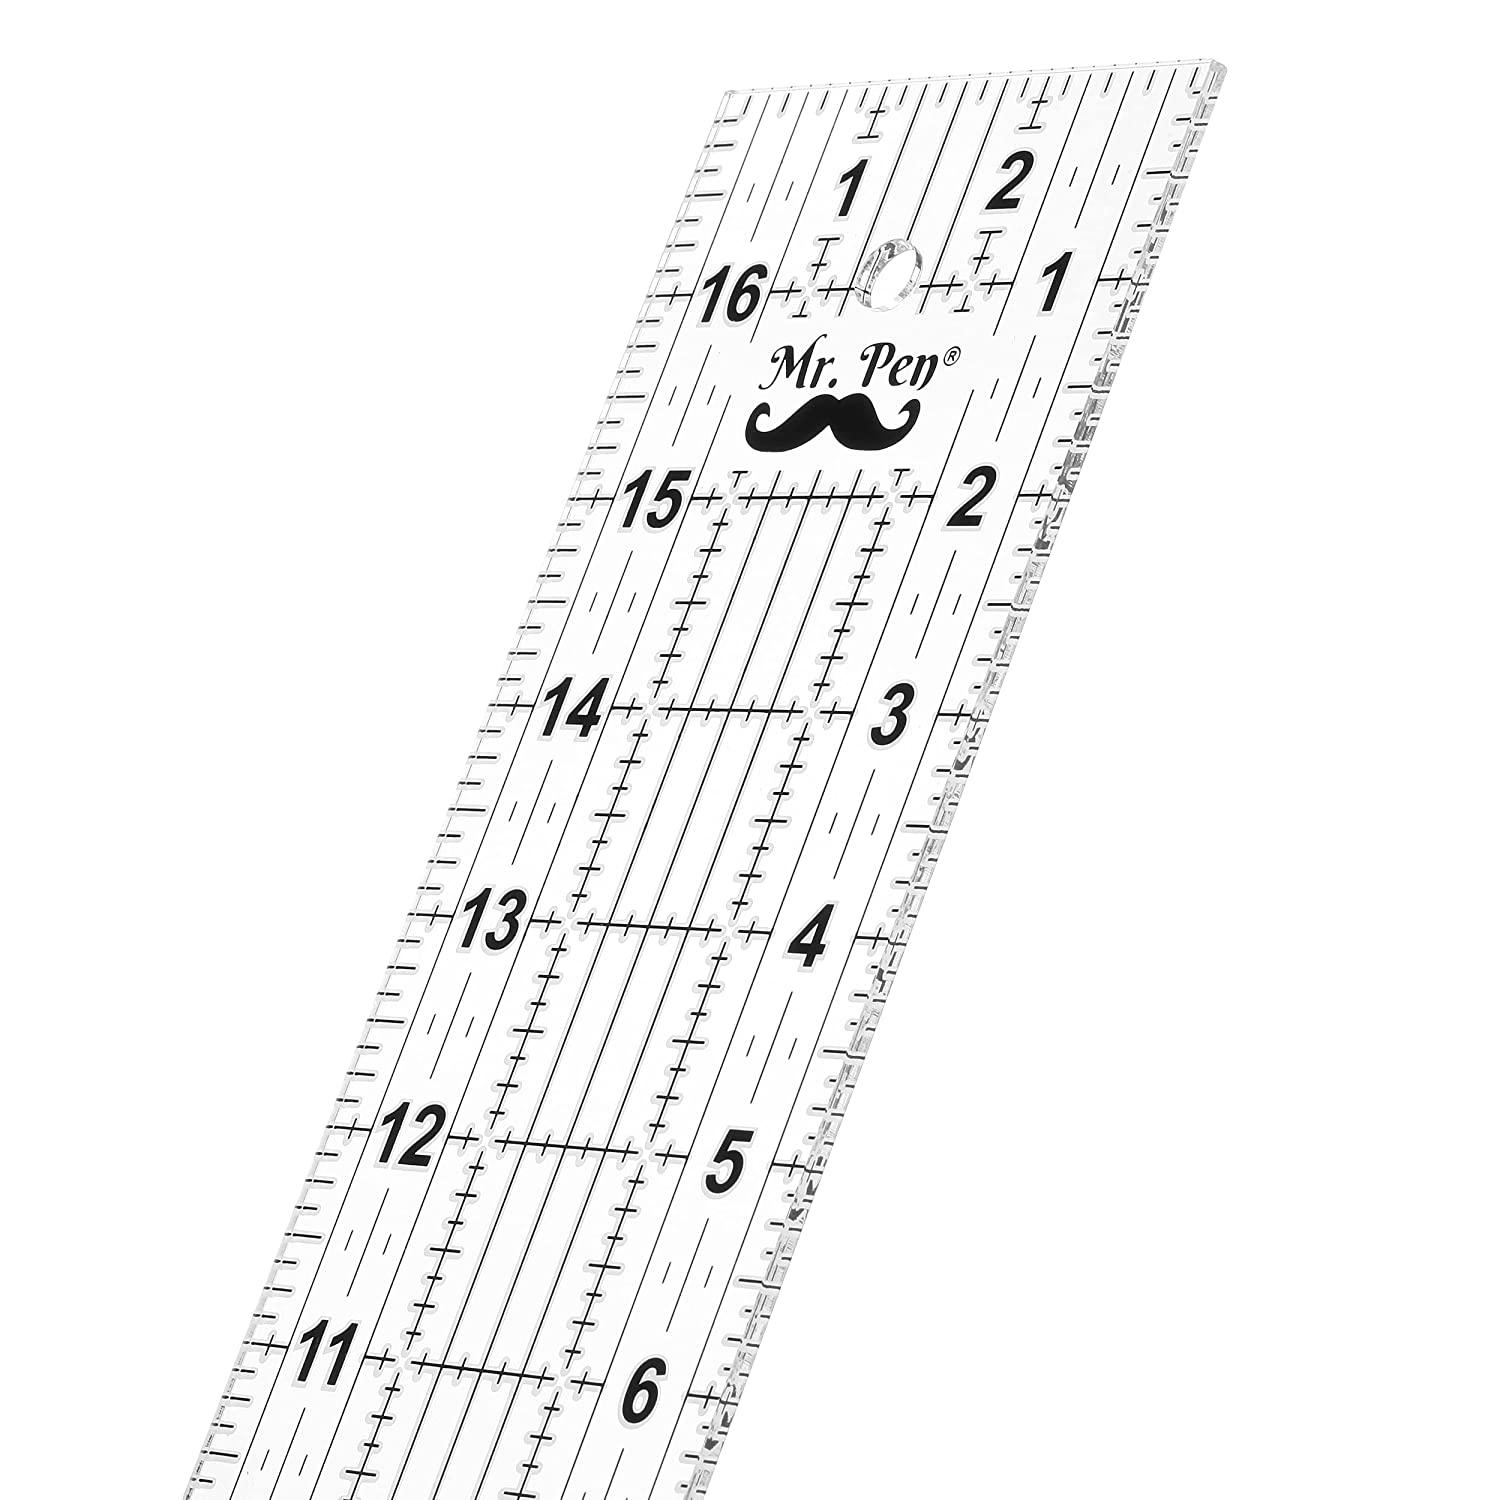  Mr. Pen- Sewing Ruler, 3 x17 Inch, Acrylic Ruler, Quilting  Ruler, Cutting Ruler, Acrylic Ruler for Cutting Fabric, Rulers for Quilting  and Sewing, Non Slip Quilt Rulers, Sewing Supplies : Arts